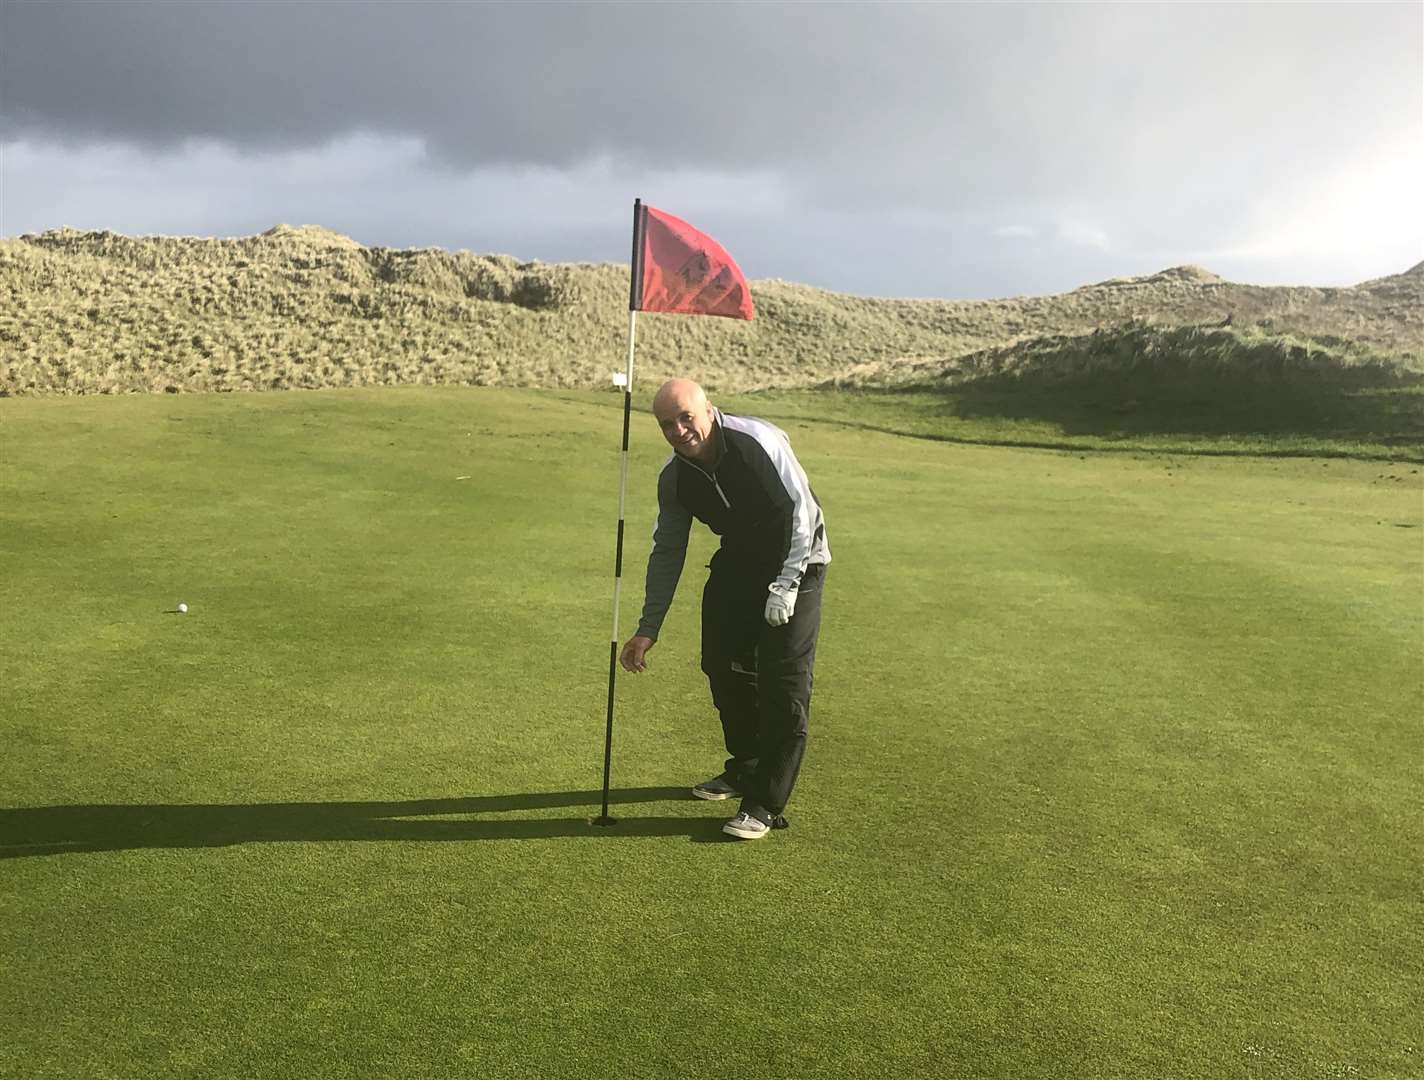 Billy Ferries collects his ball after his hole in one.